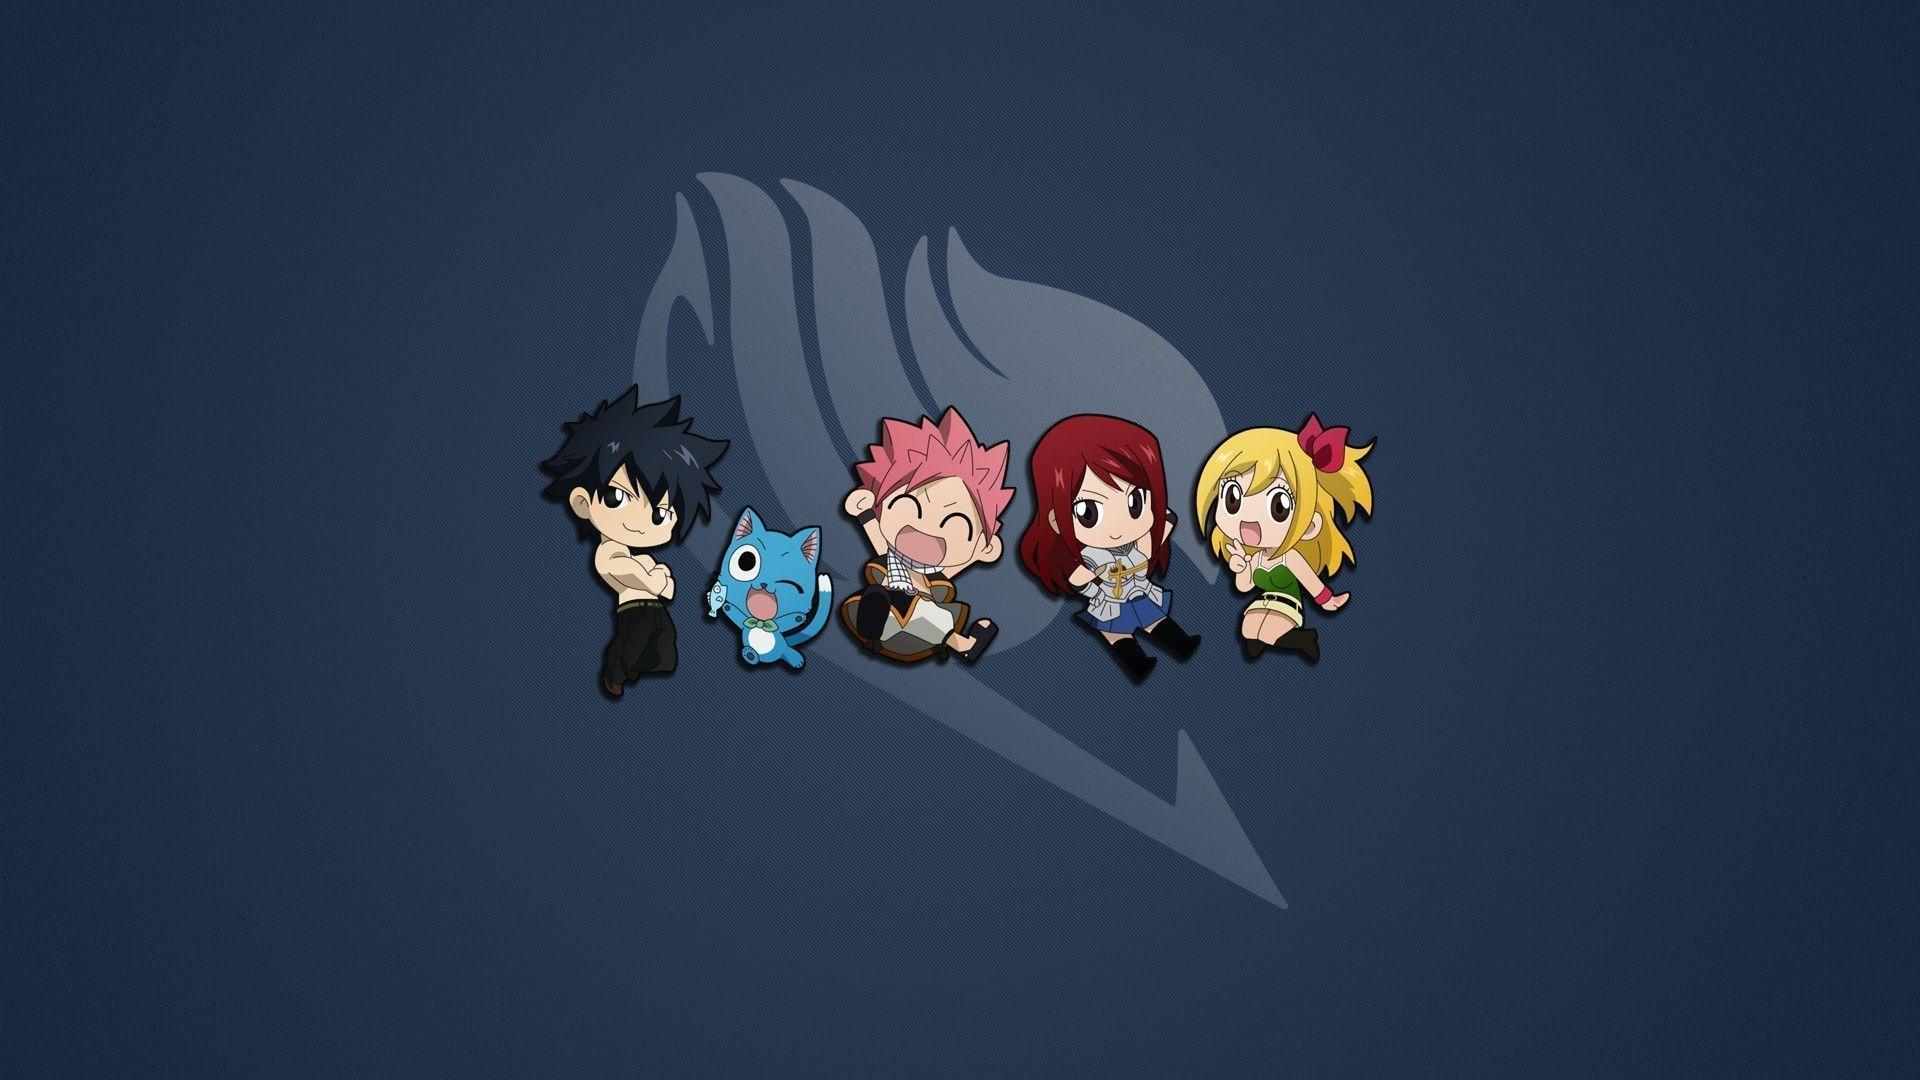 Fairy tail 1080p, 2k, 4k, 5k hd wallpapers free download, these wallpapers are free download for pc, laptop, iphone, android phone and ipad desktop. Fairy Tail Anime Logo Wallpapers Top Free Fairy Tail Anime Logo Backgrounds Wallpaperaccess